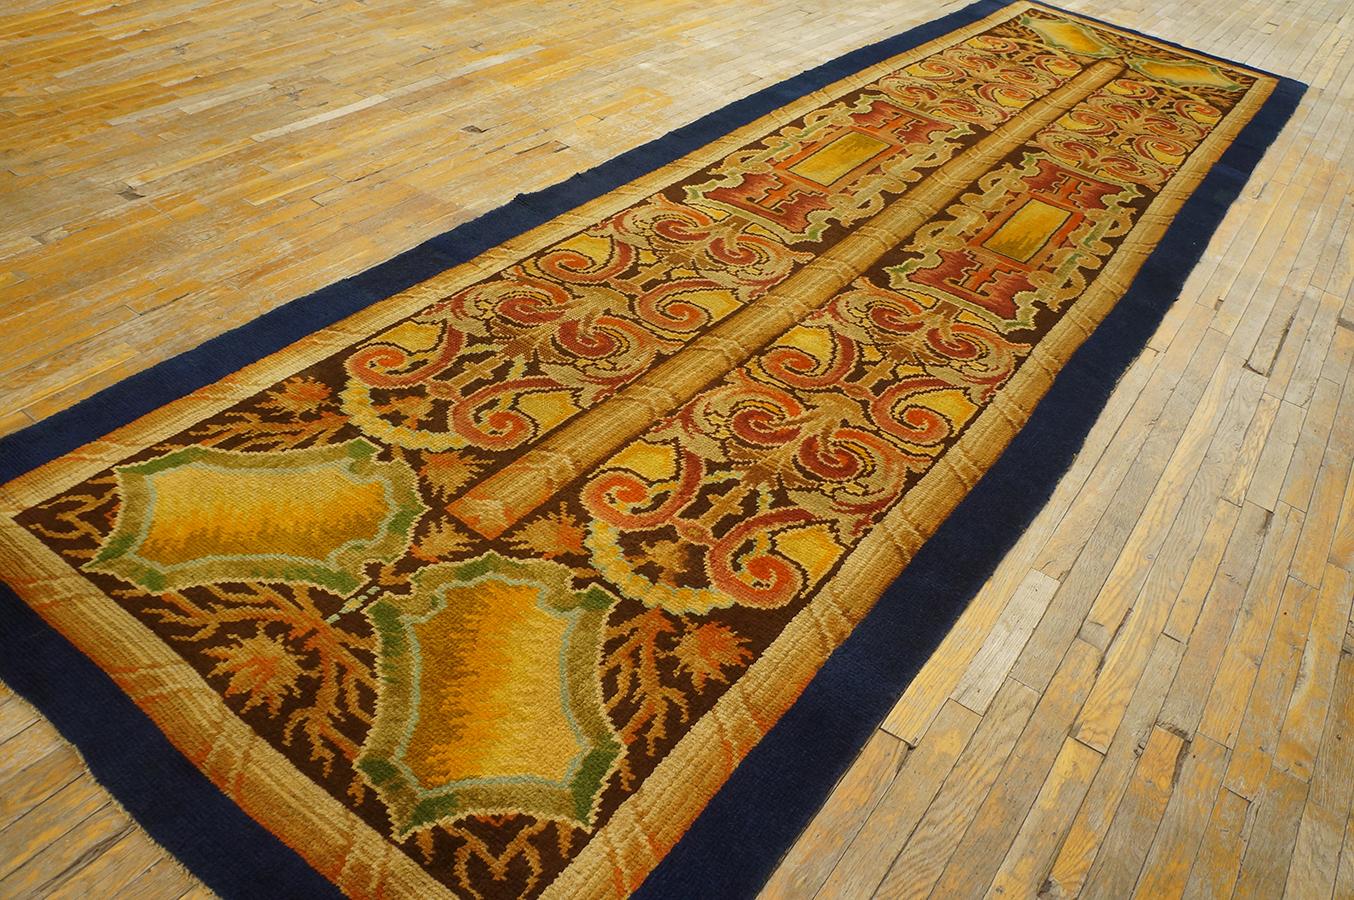 Late 19th Century Early 20th Century English Axminster Carpet ( 4'9